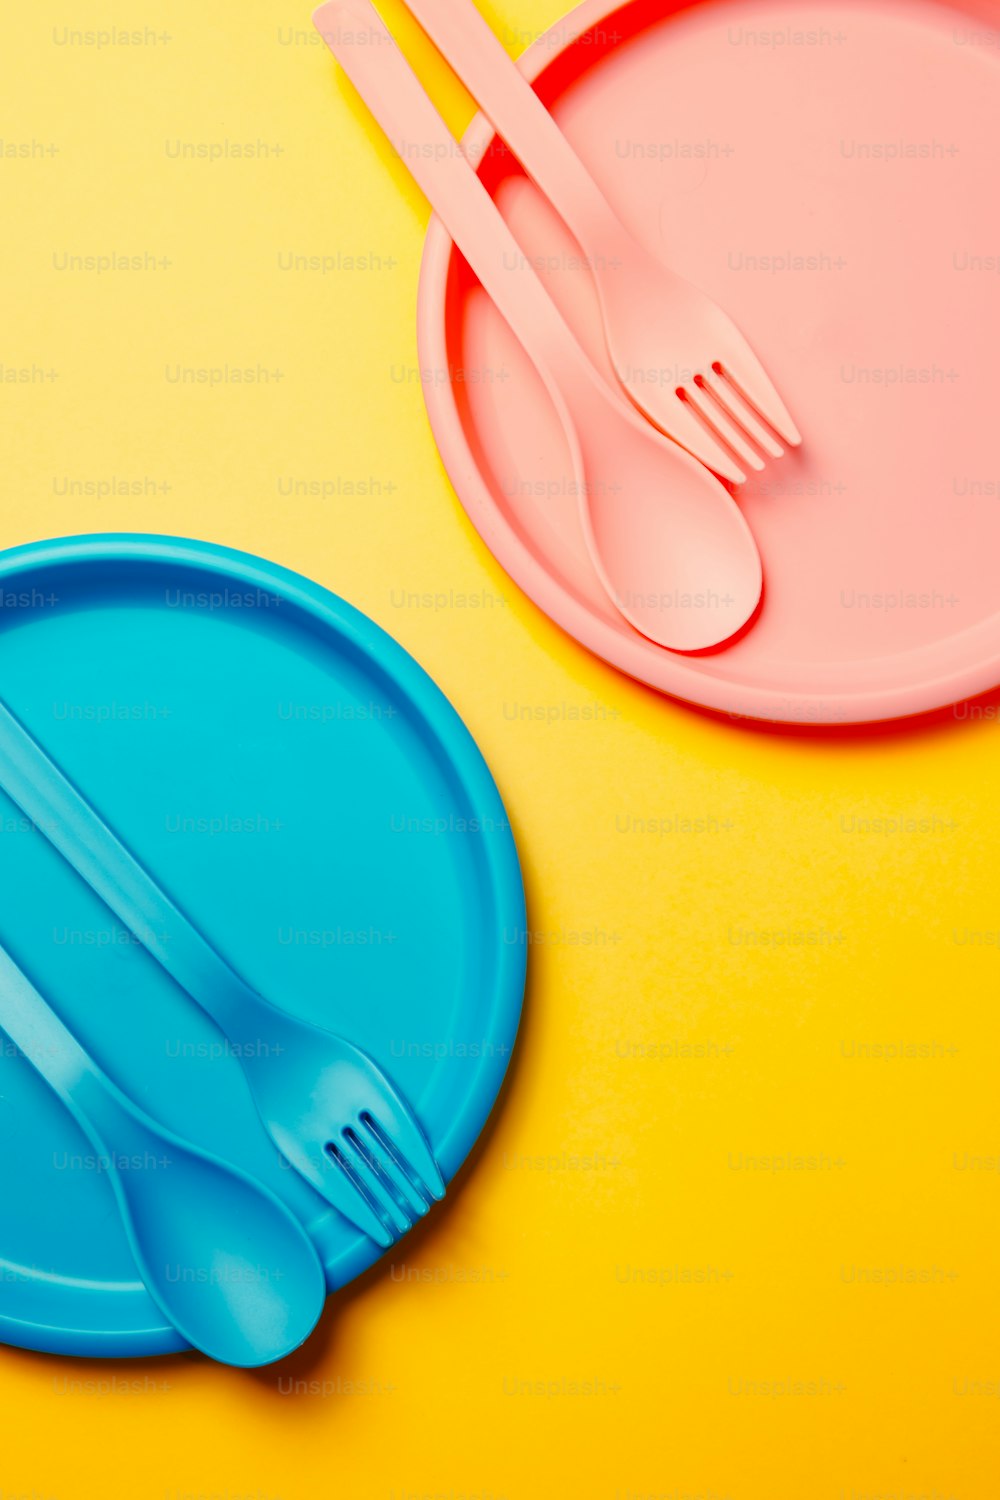 a plastic fork and a plastic plate on a yellow and pink background